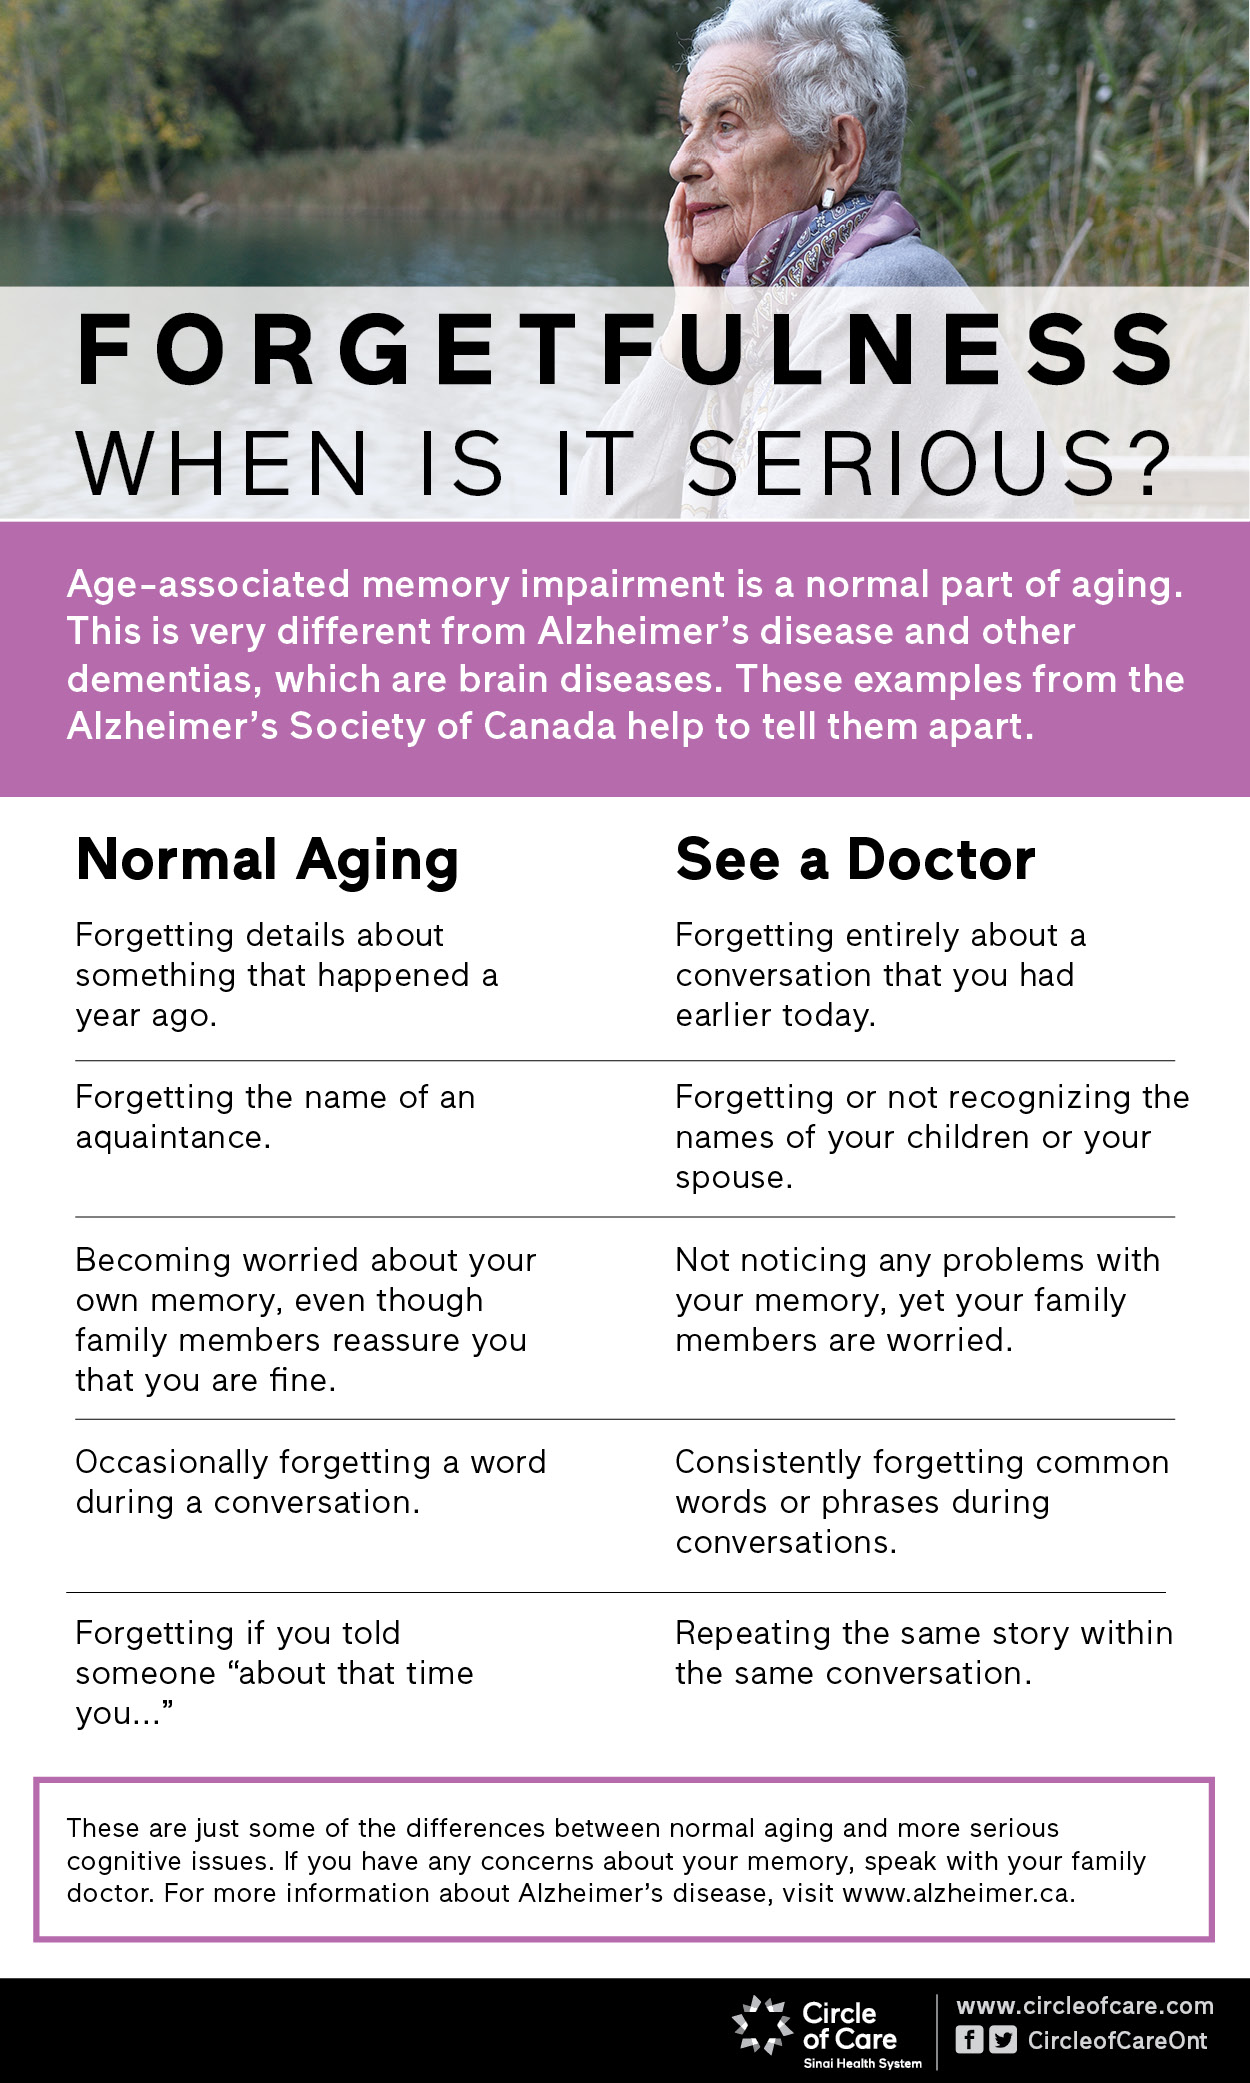 infographic about the differences between normal aging and Alzheimer's.